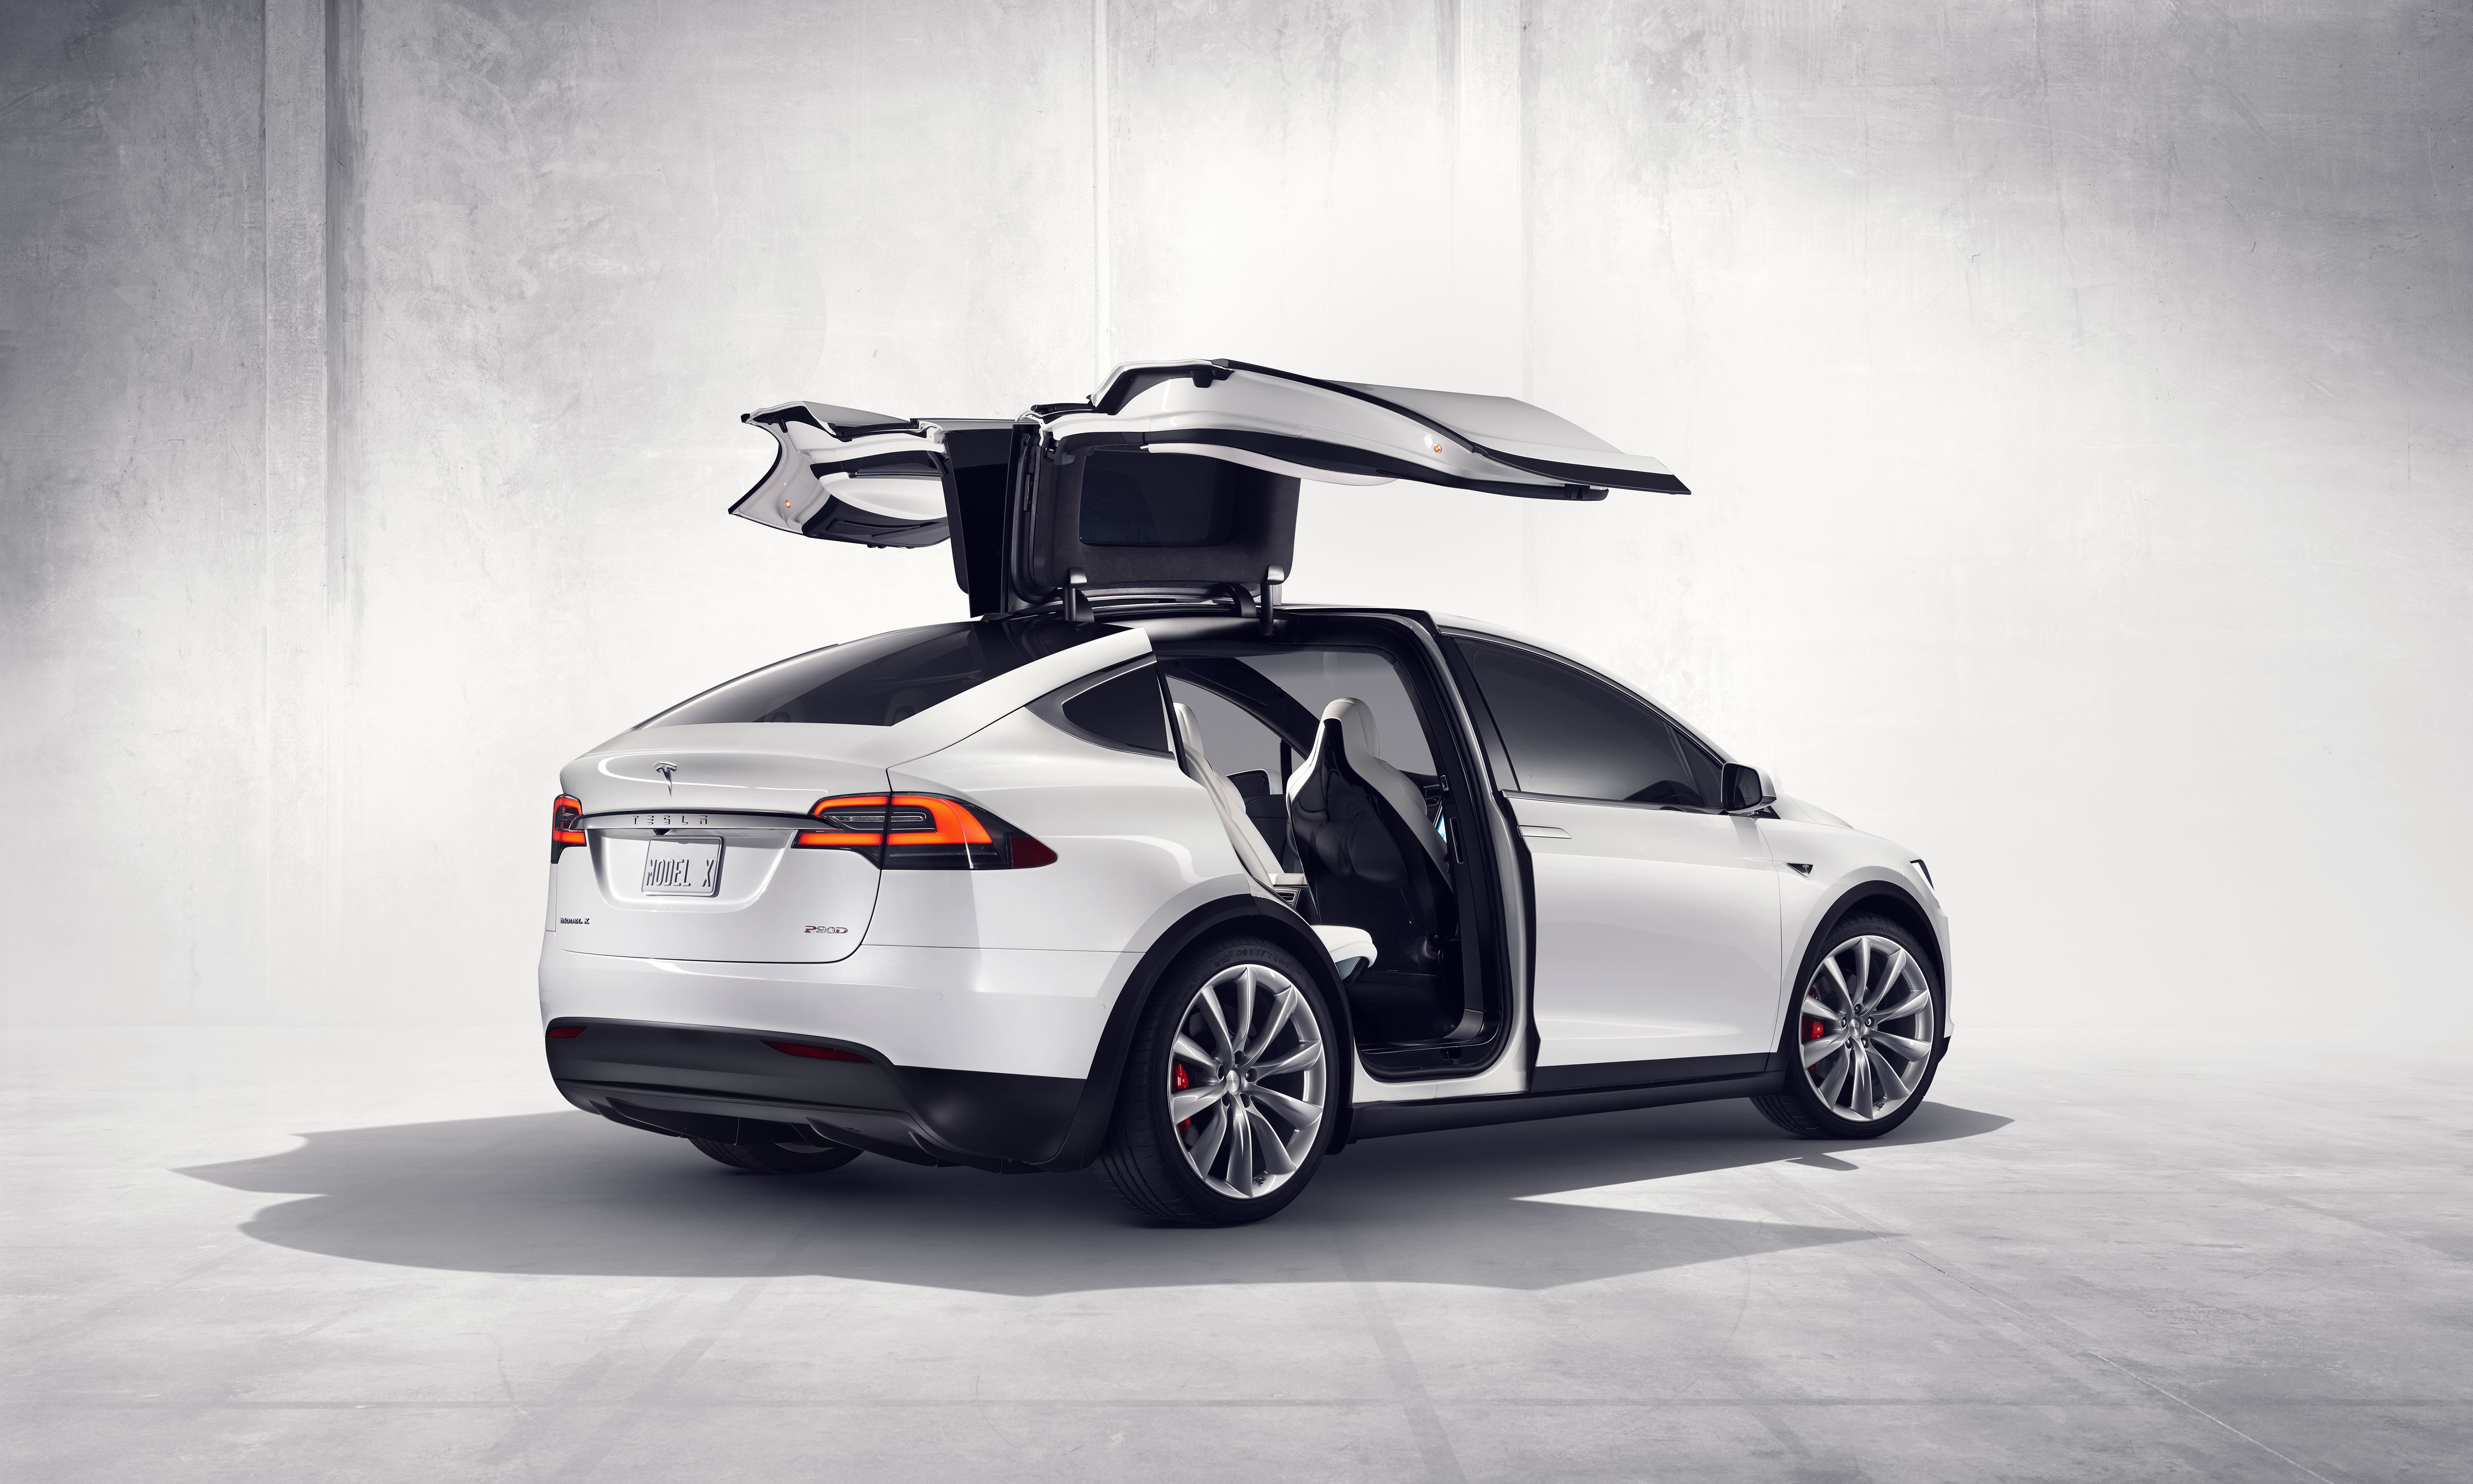 the open falcon wing doors of the white Tesla Model X